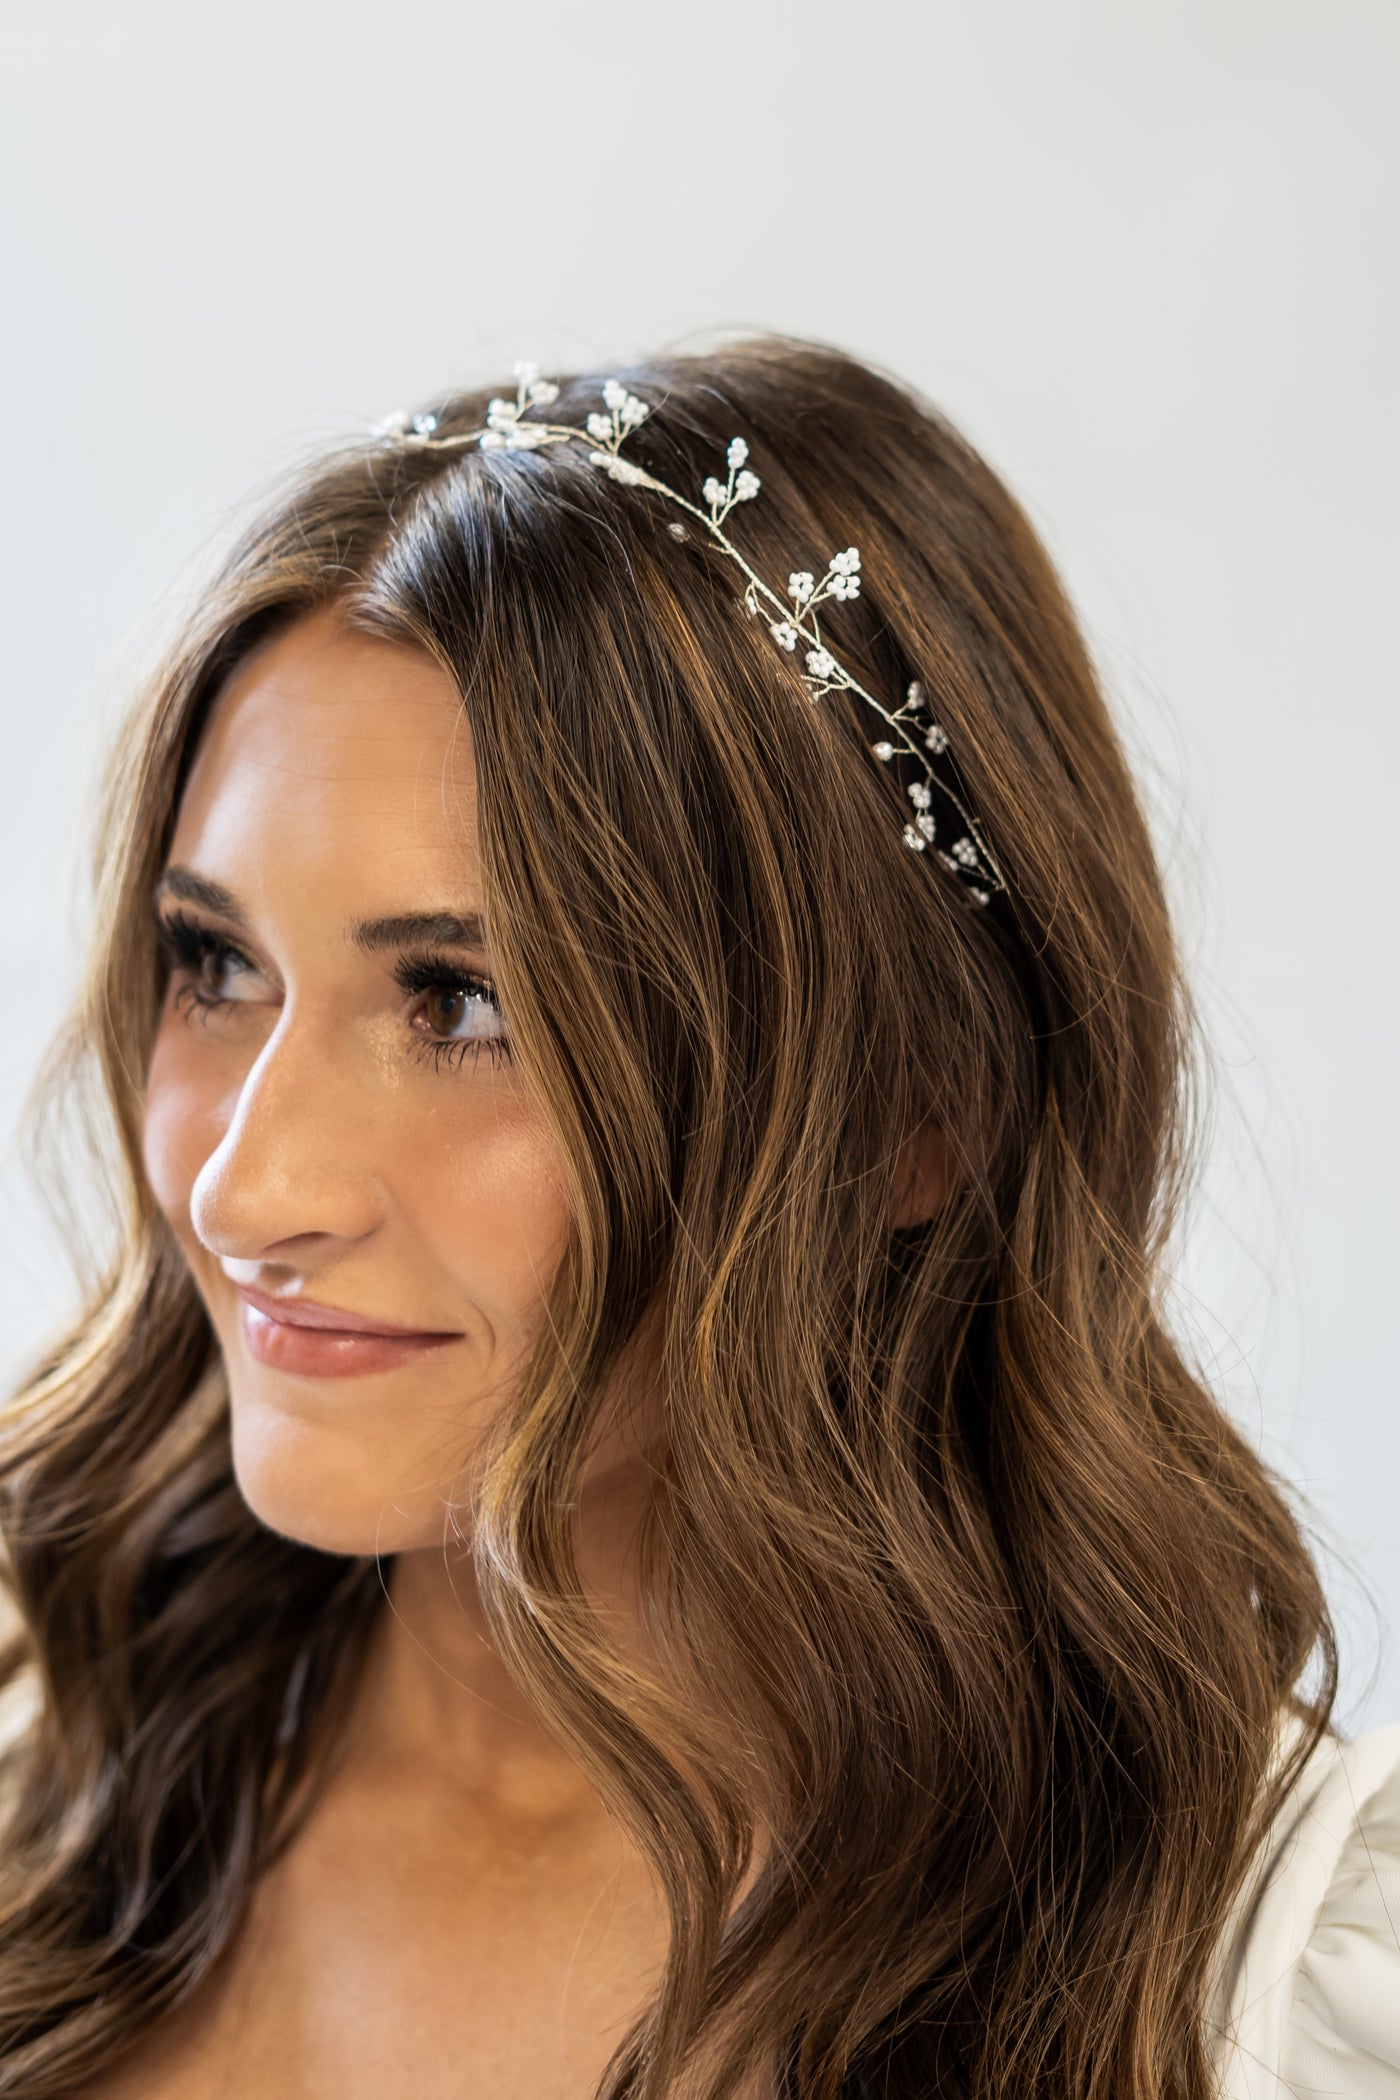 This delicate floral pearl headpiece with a gold band is the perfect accessory for a simple bride.